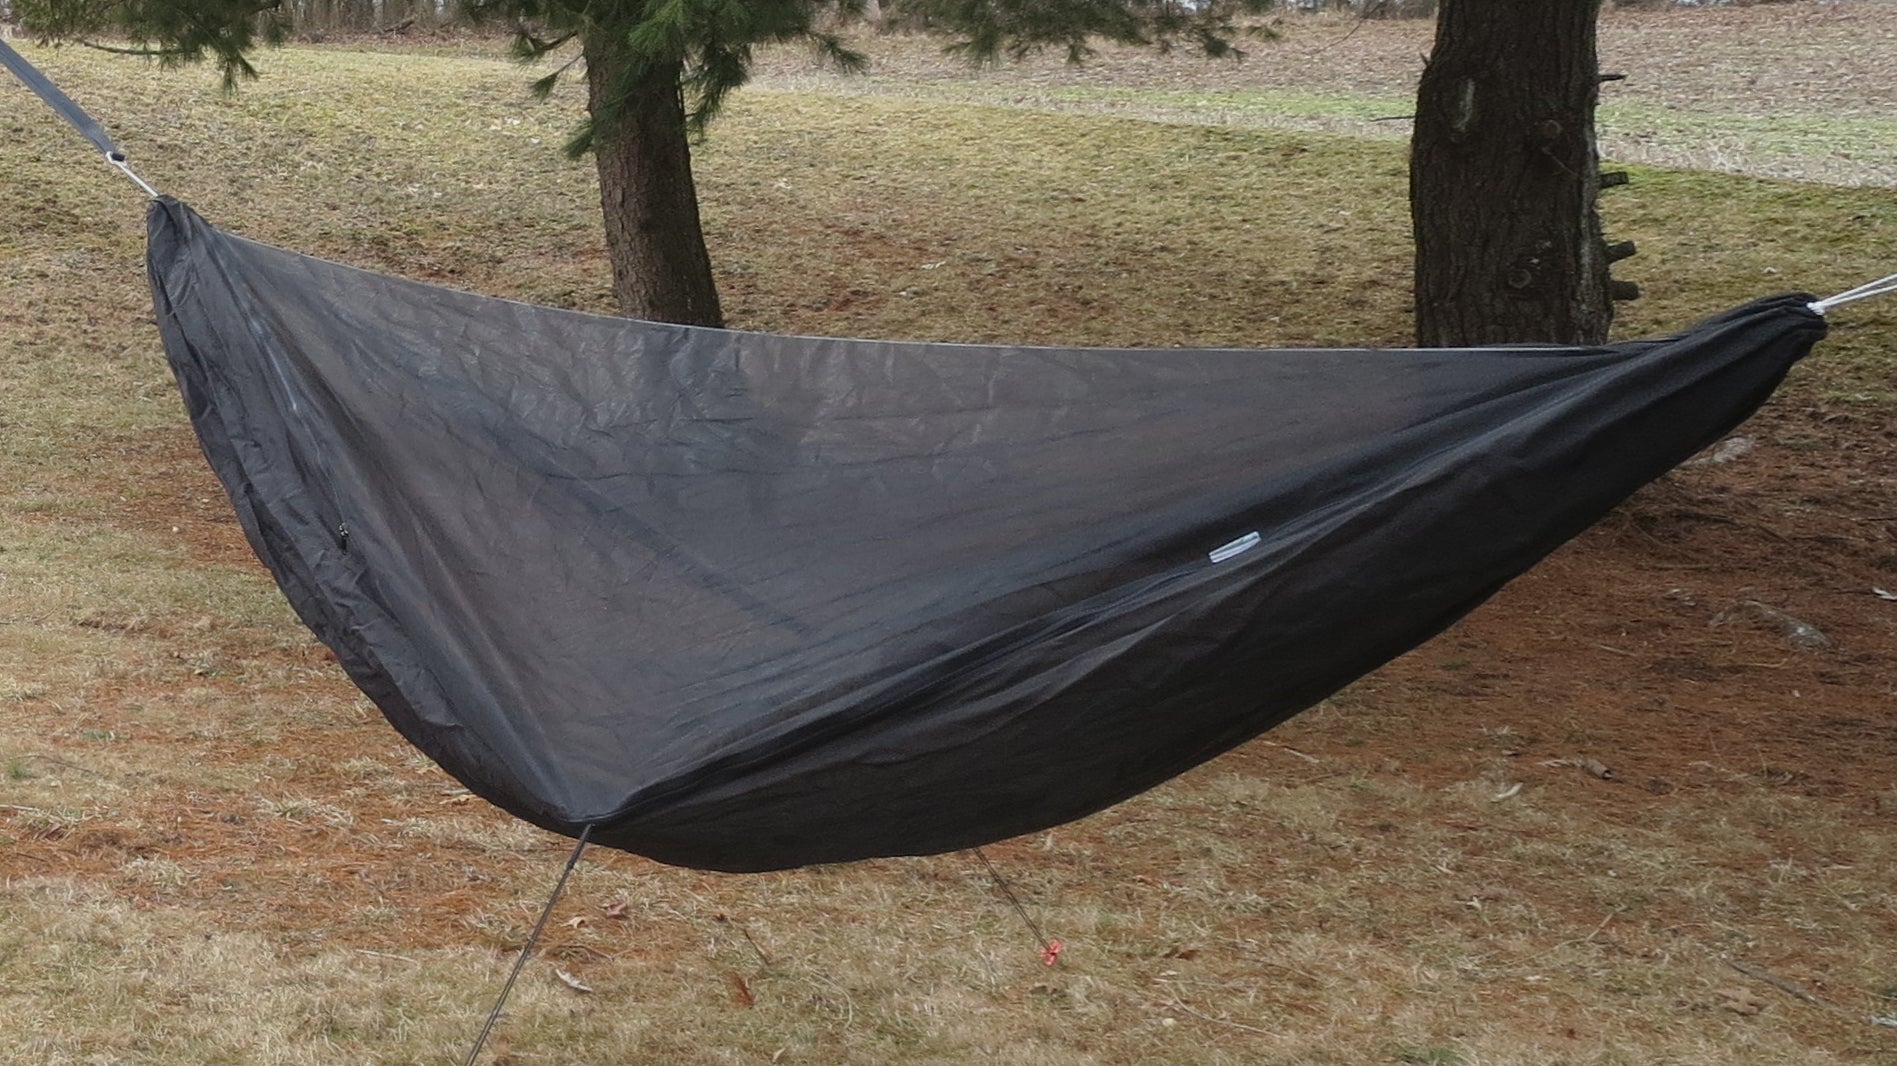 Ultralight gray/black custom hammock for backpacking and camping with bugnet or mosquito net.